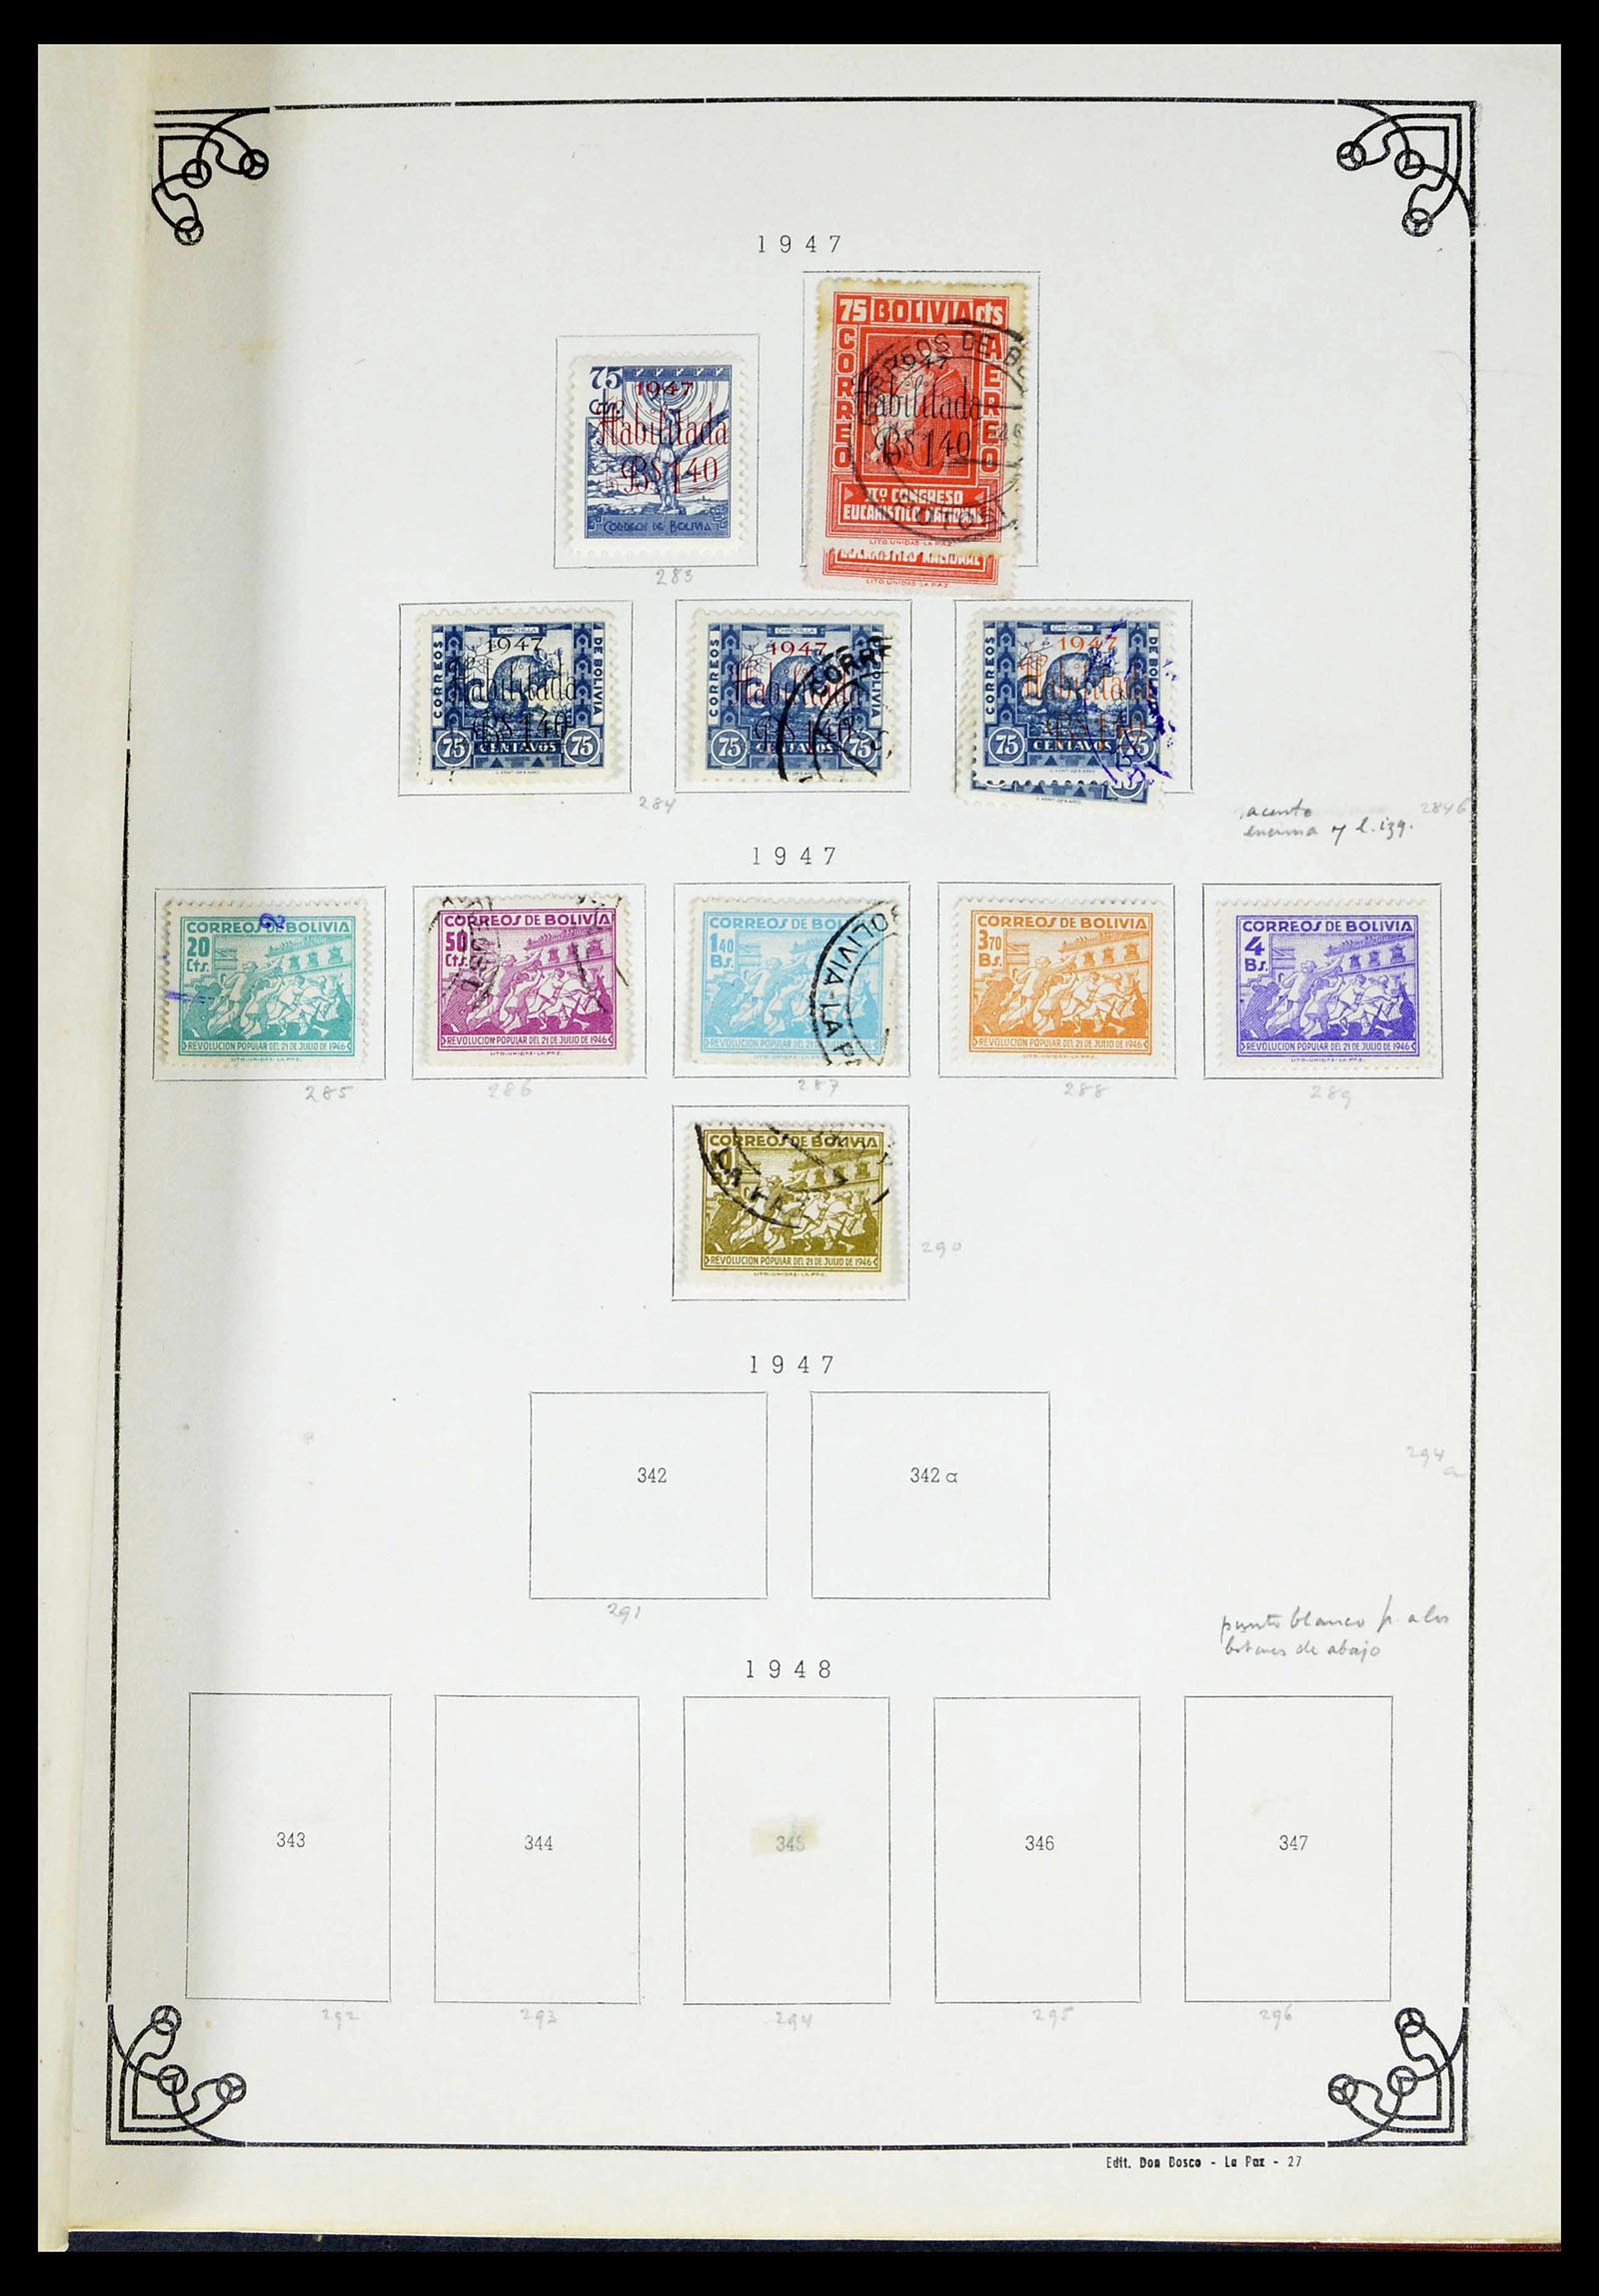 39224 0033 - Stamp collection 39224 Bolivia 1849-1955.